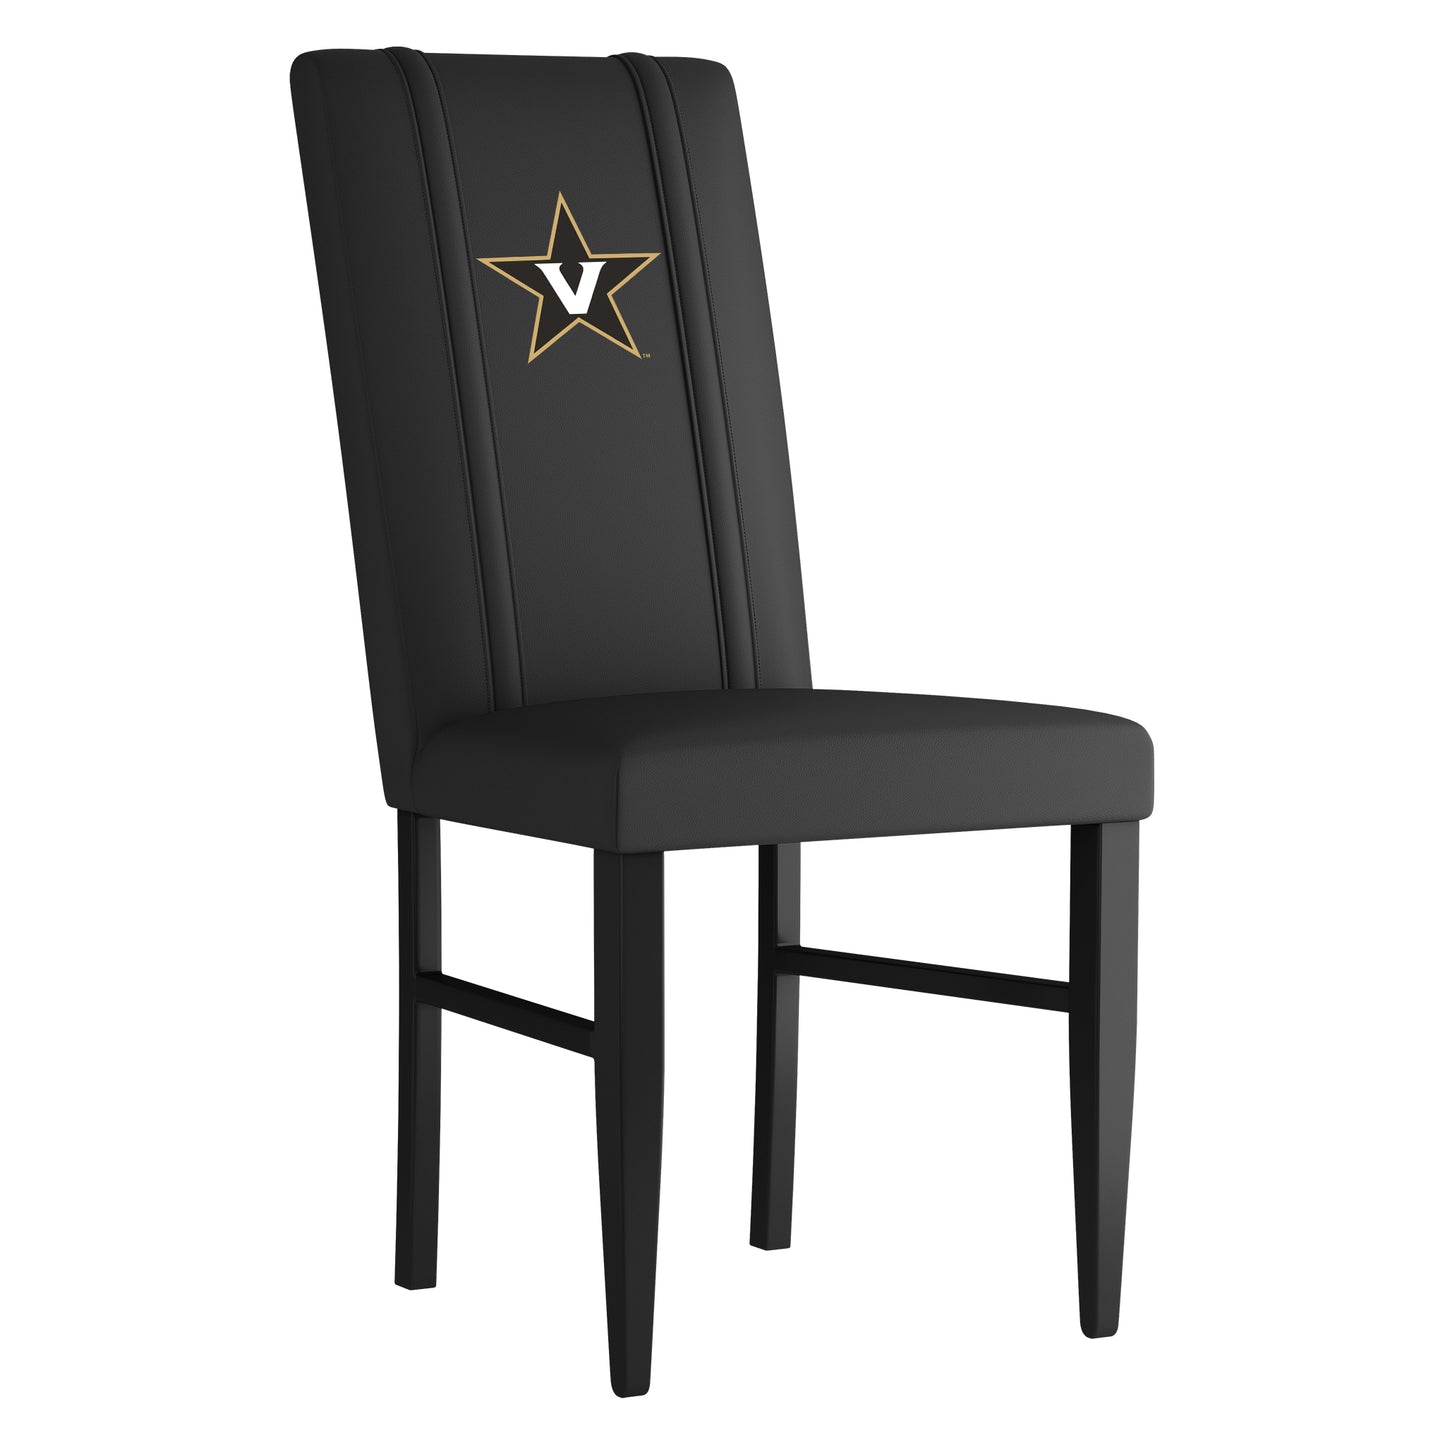 Side Chair 2000 with Vanderbilt Commodores Alternate Set of 2